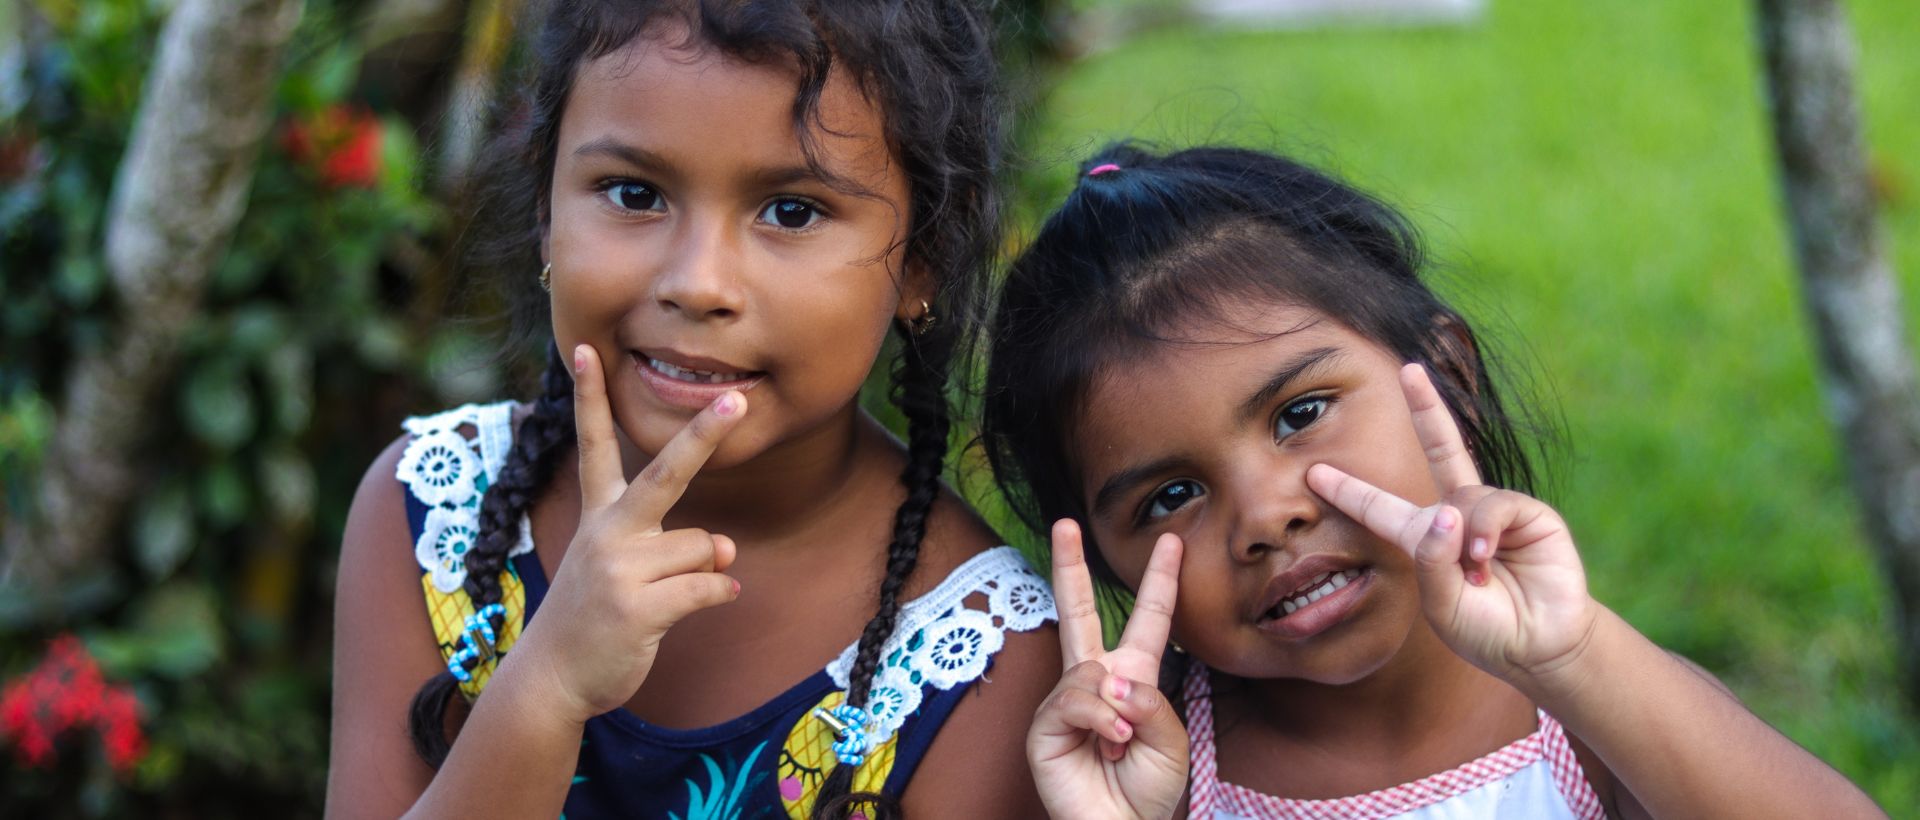 two little girls making peace signs with their hands.